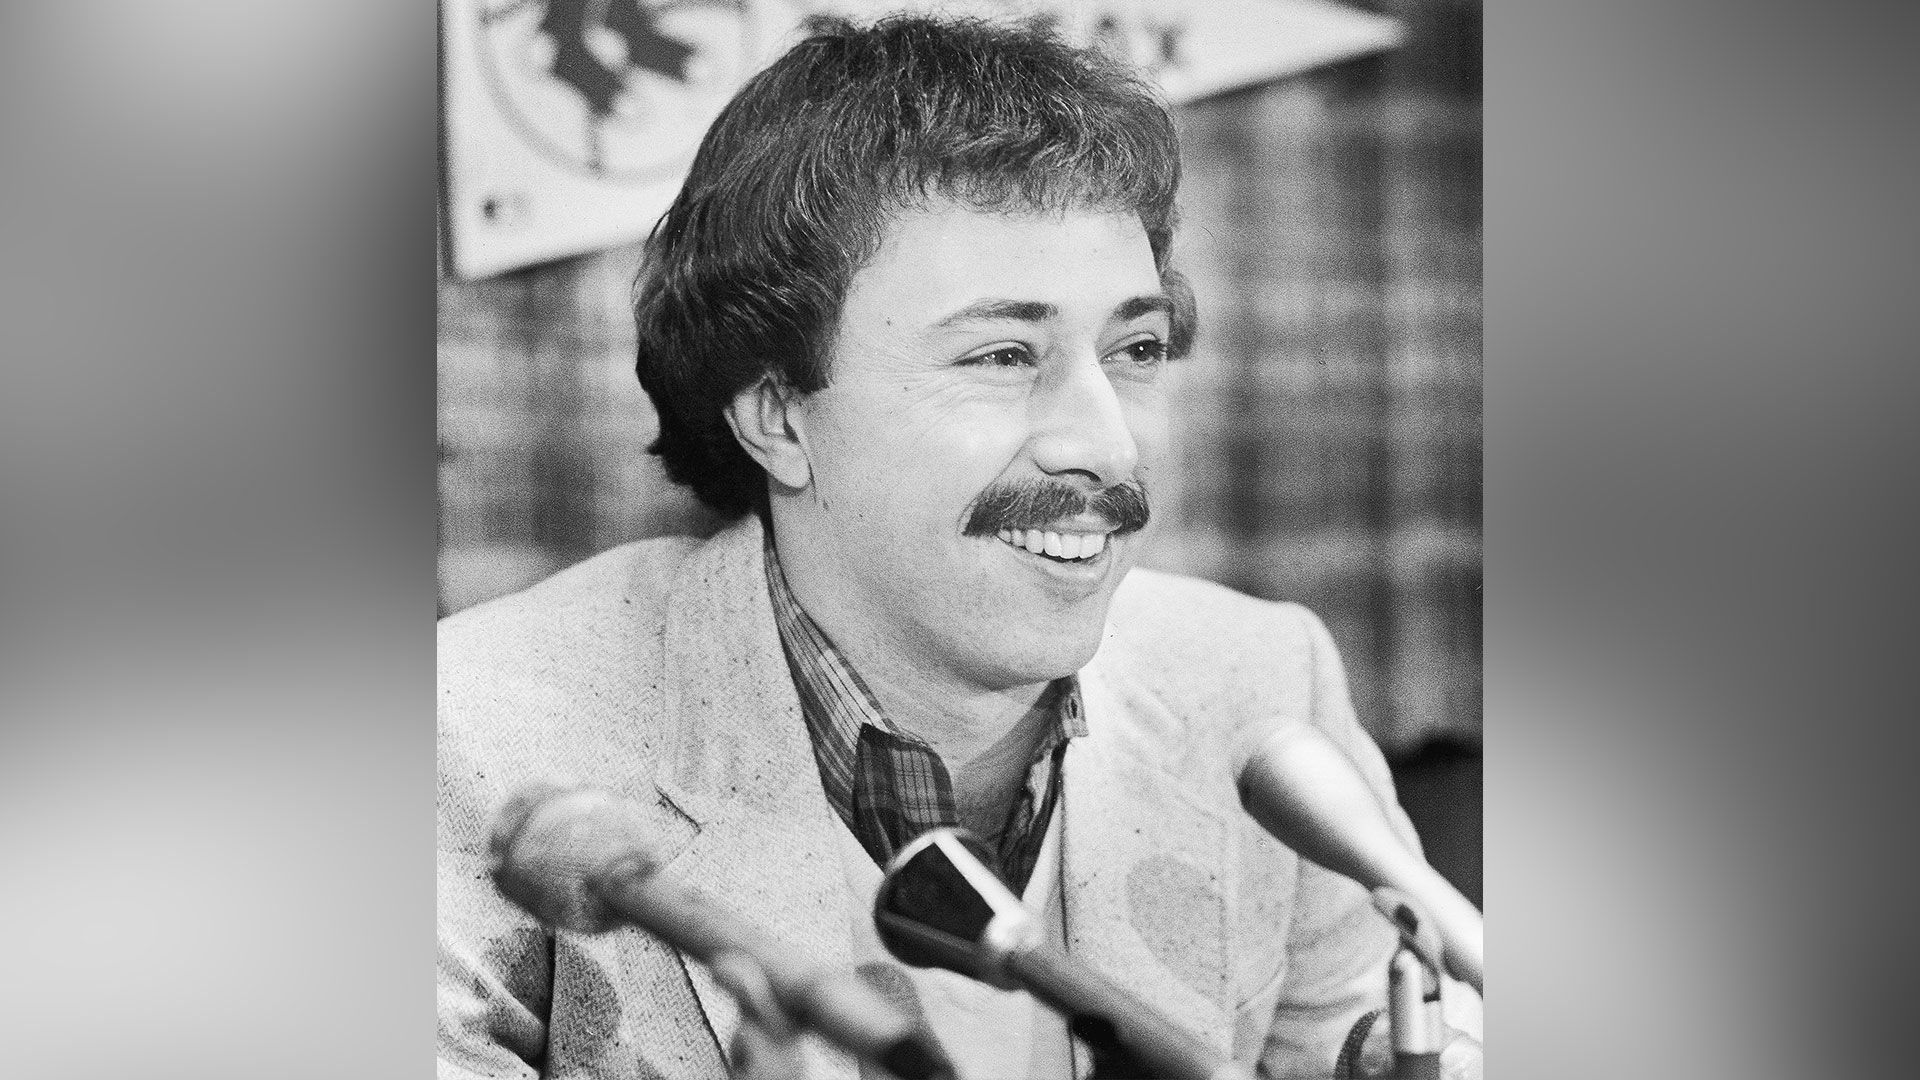 RIP: Jerry Remy (1952-2021)